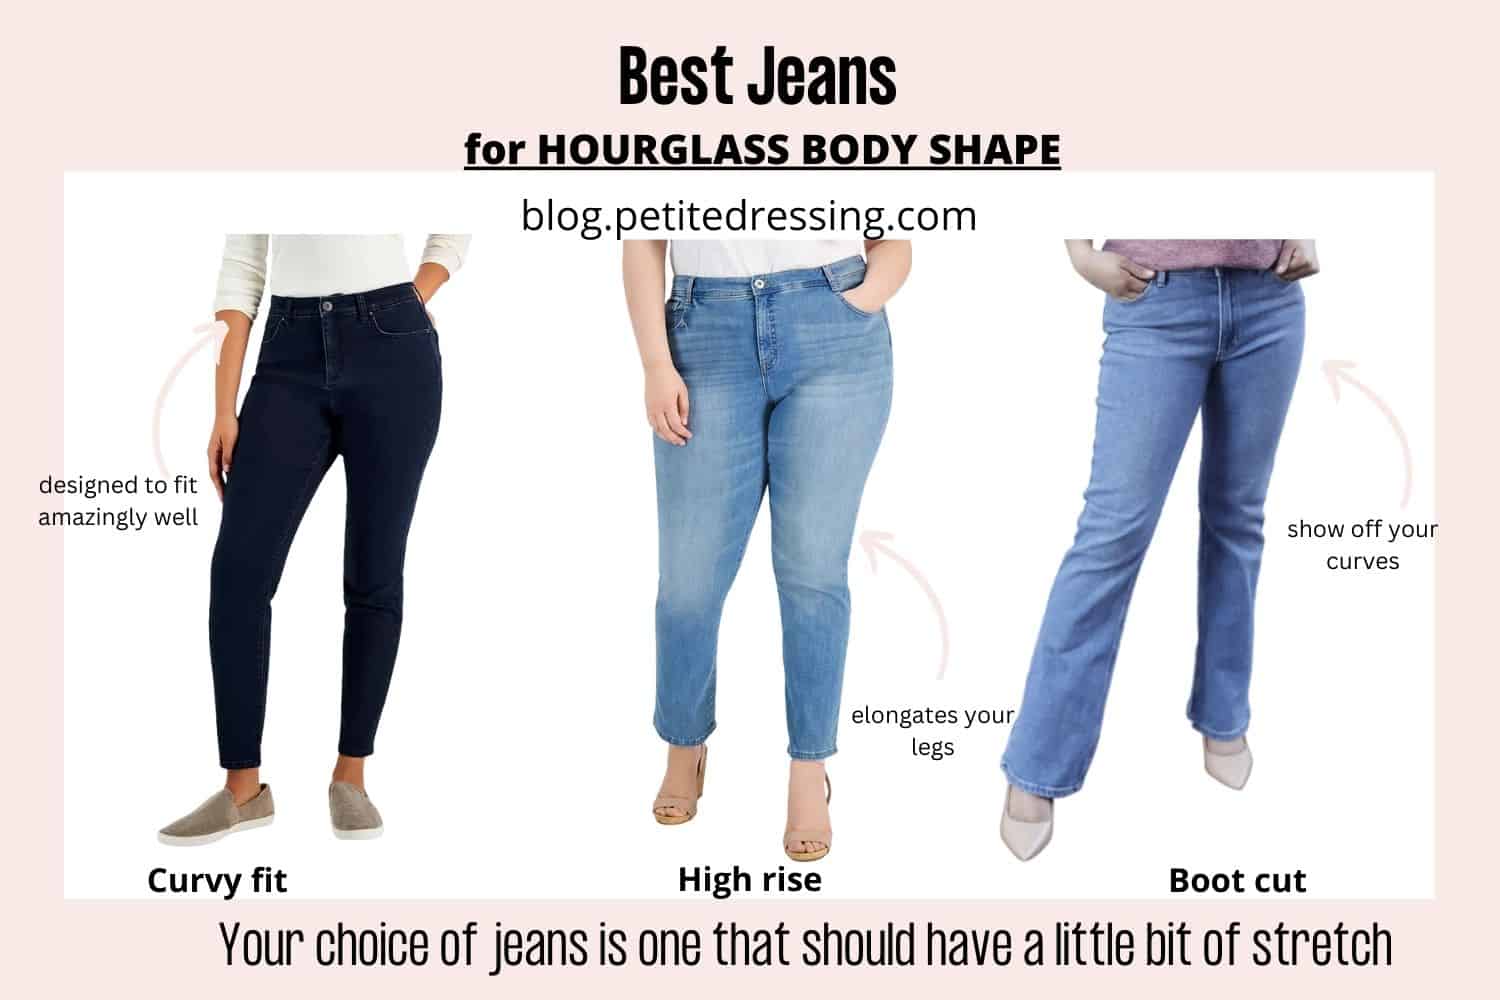 BEST JEANS FOR HOURGLASS BODY SHAPE